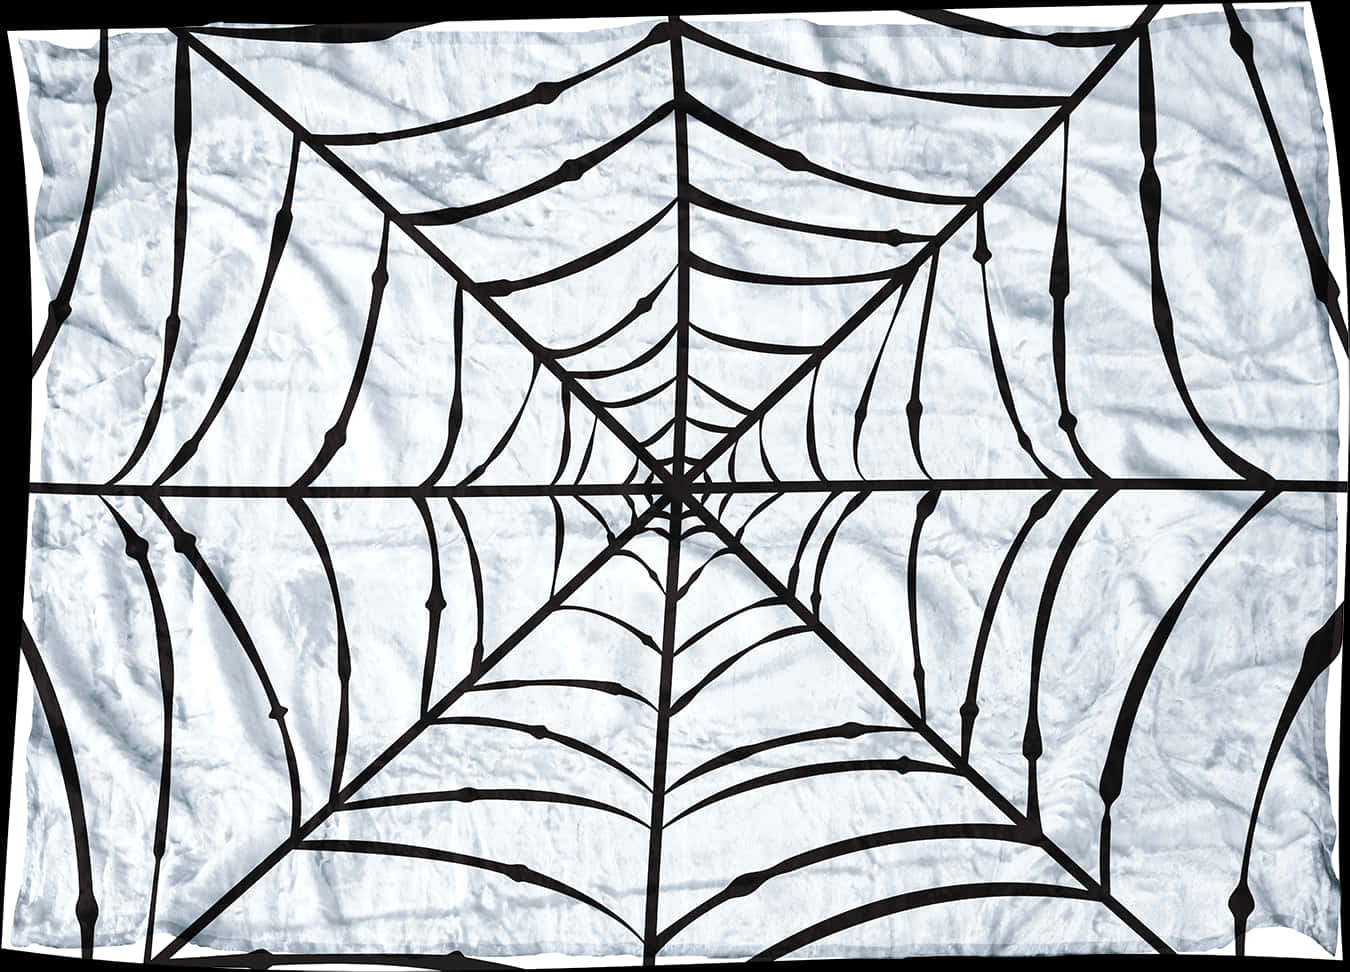 A Spider Web On A White Blanket